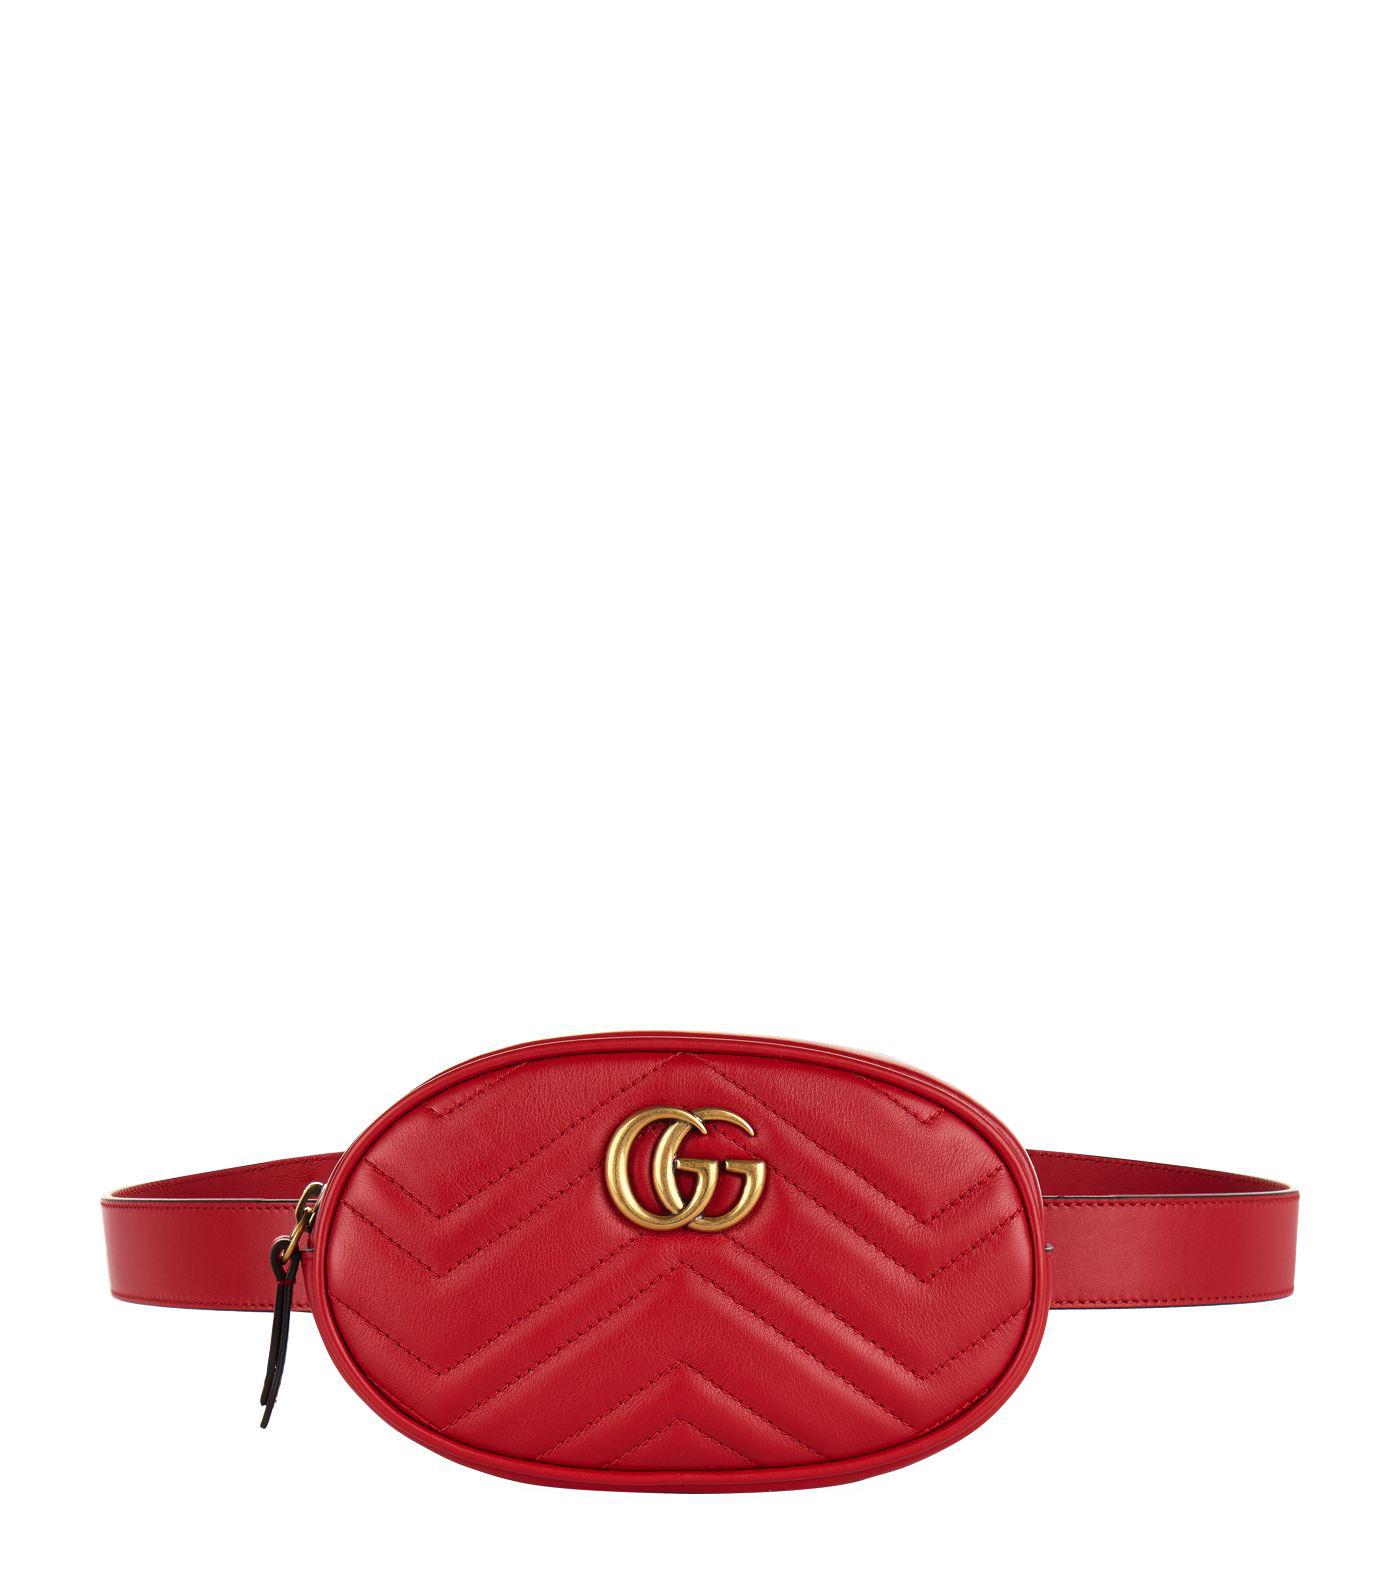 Lyst - Gucci Leather Marmont Matelass Belt Bag in Red - Save 17%